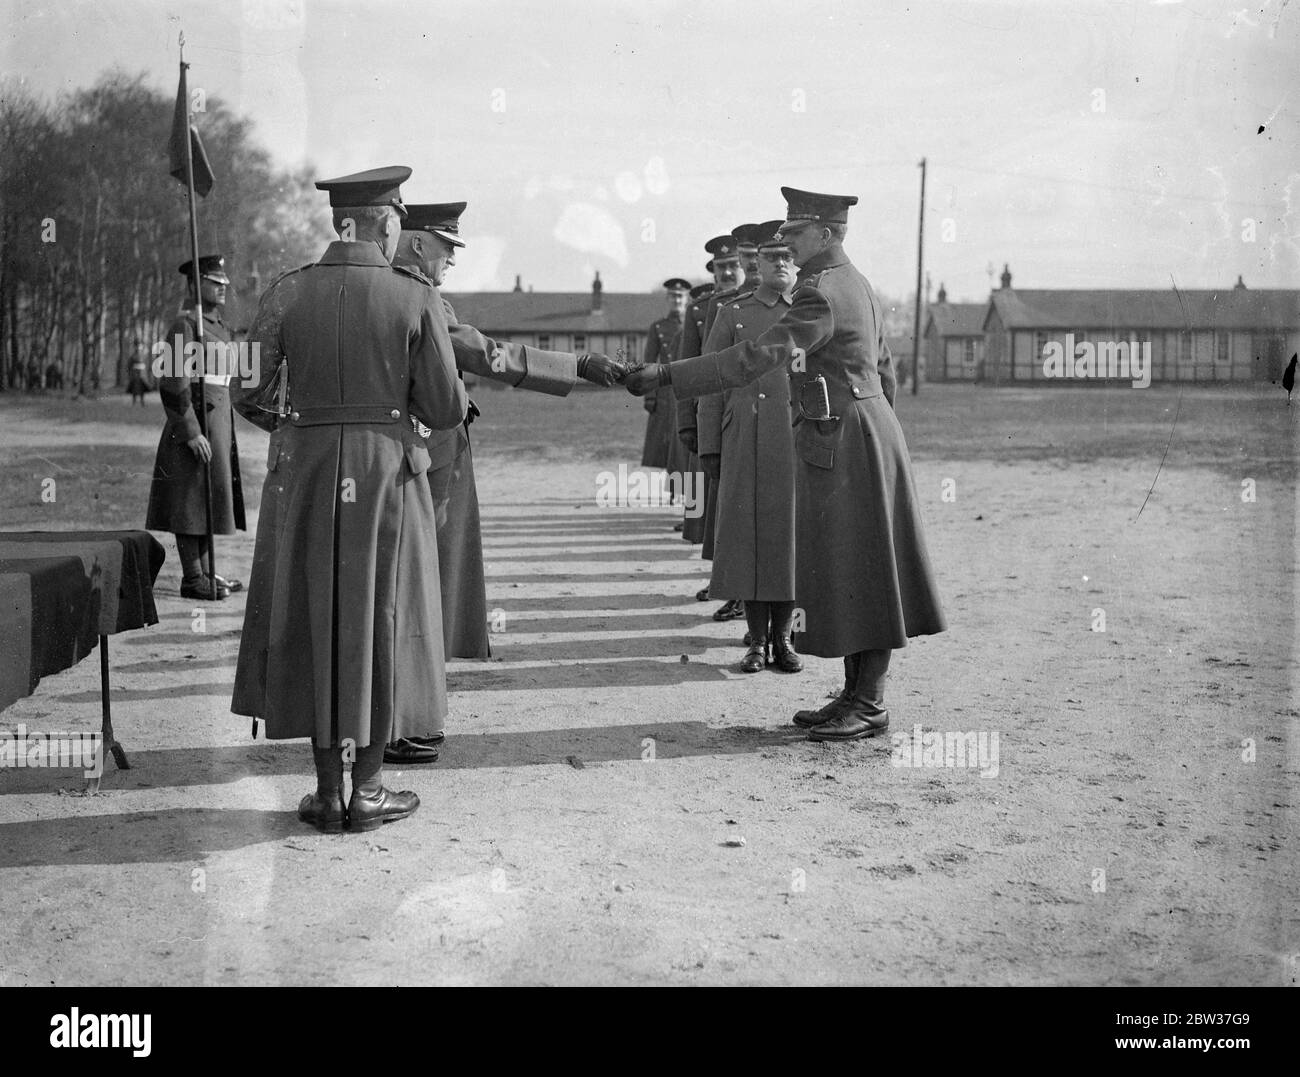 St Patrick ' s day shamrock for Irish Guard . The ceremony of presenting shamrock to the Irish Guards was carried out on St Patrick ' s day at Pirbright Camp , Brookwood , Surrey . Photo shows , Colonel L M Gregson , O B E , distributing the shamrock to officers of the 1st Battalion Irish Guards . 17 March 1934 Stock Photo